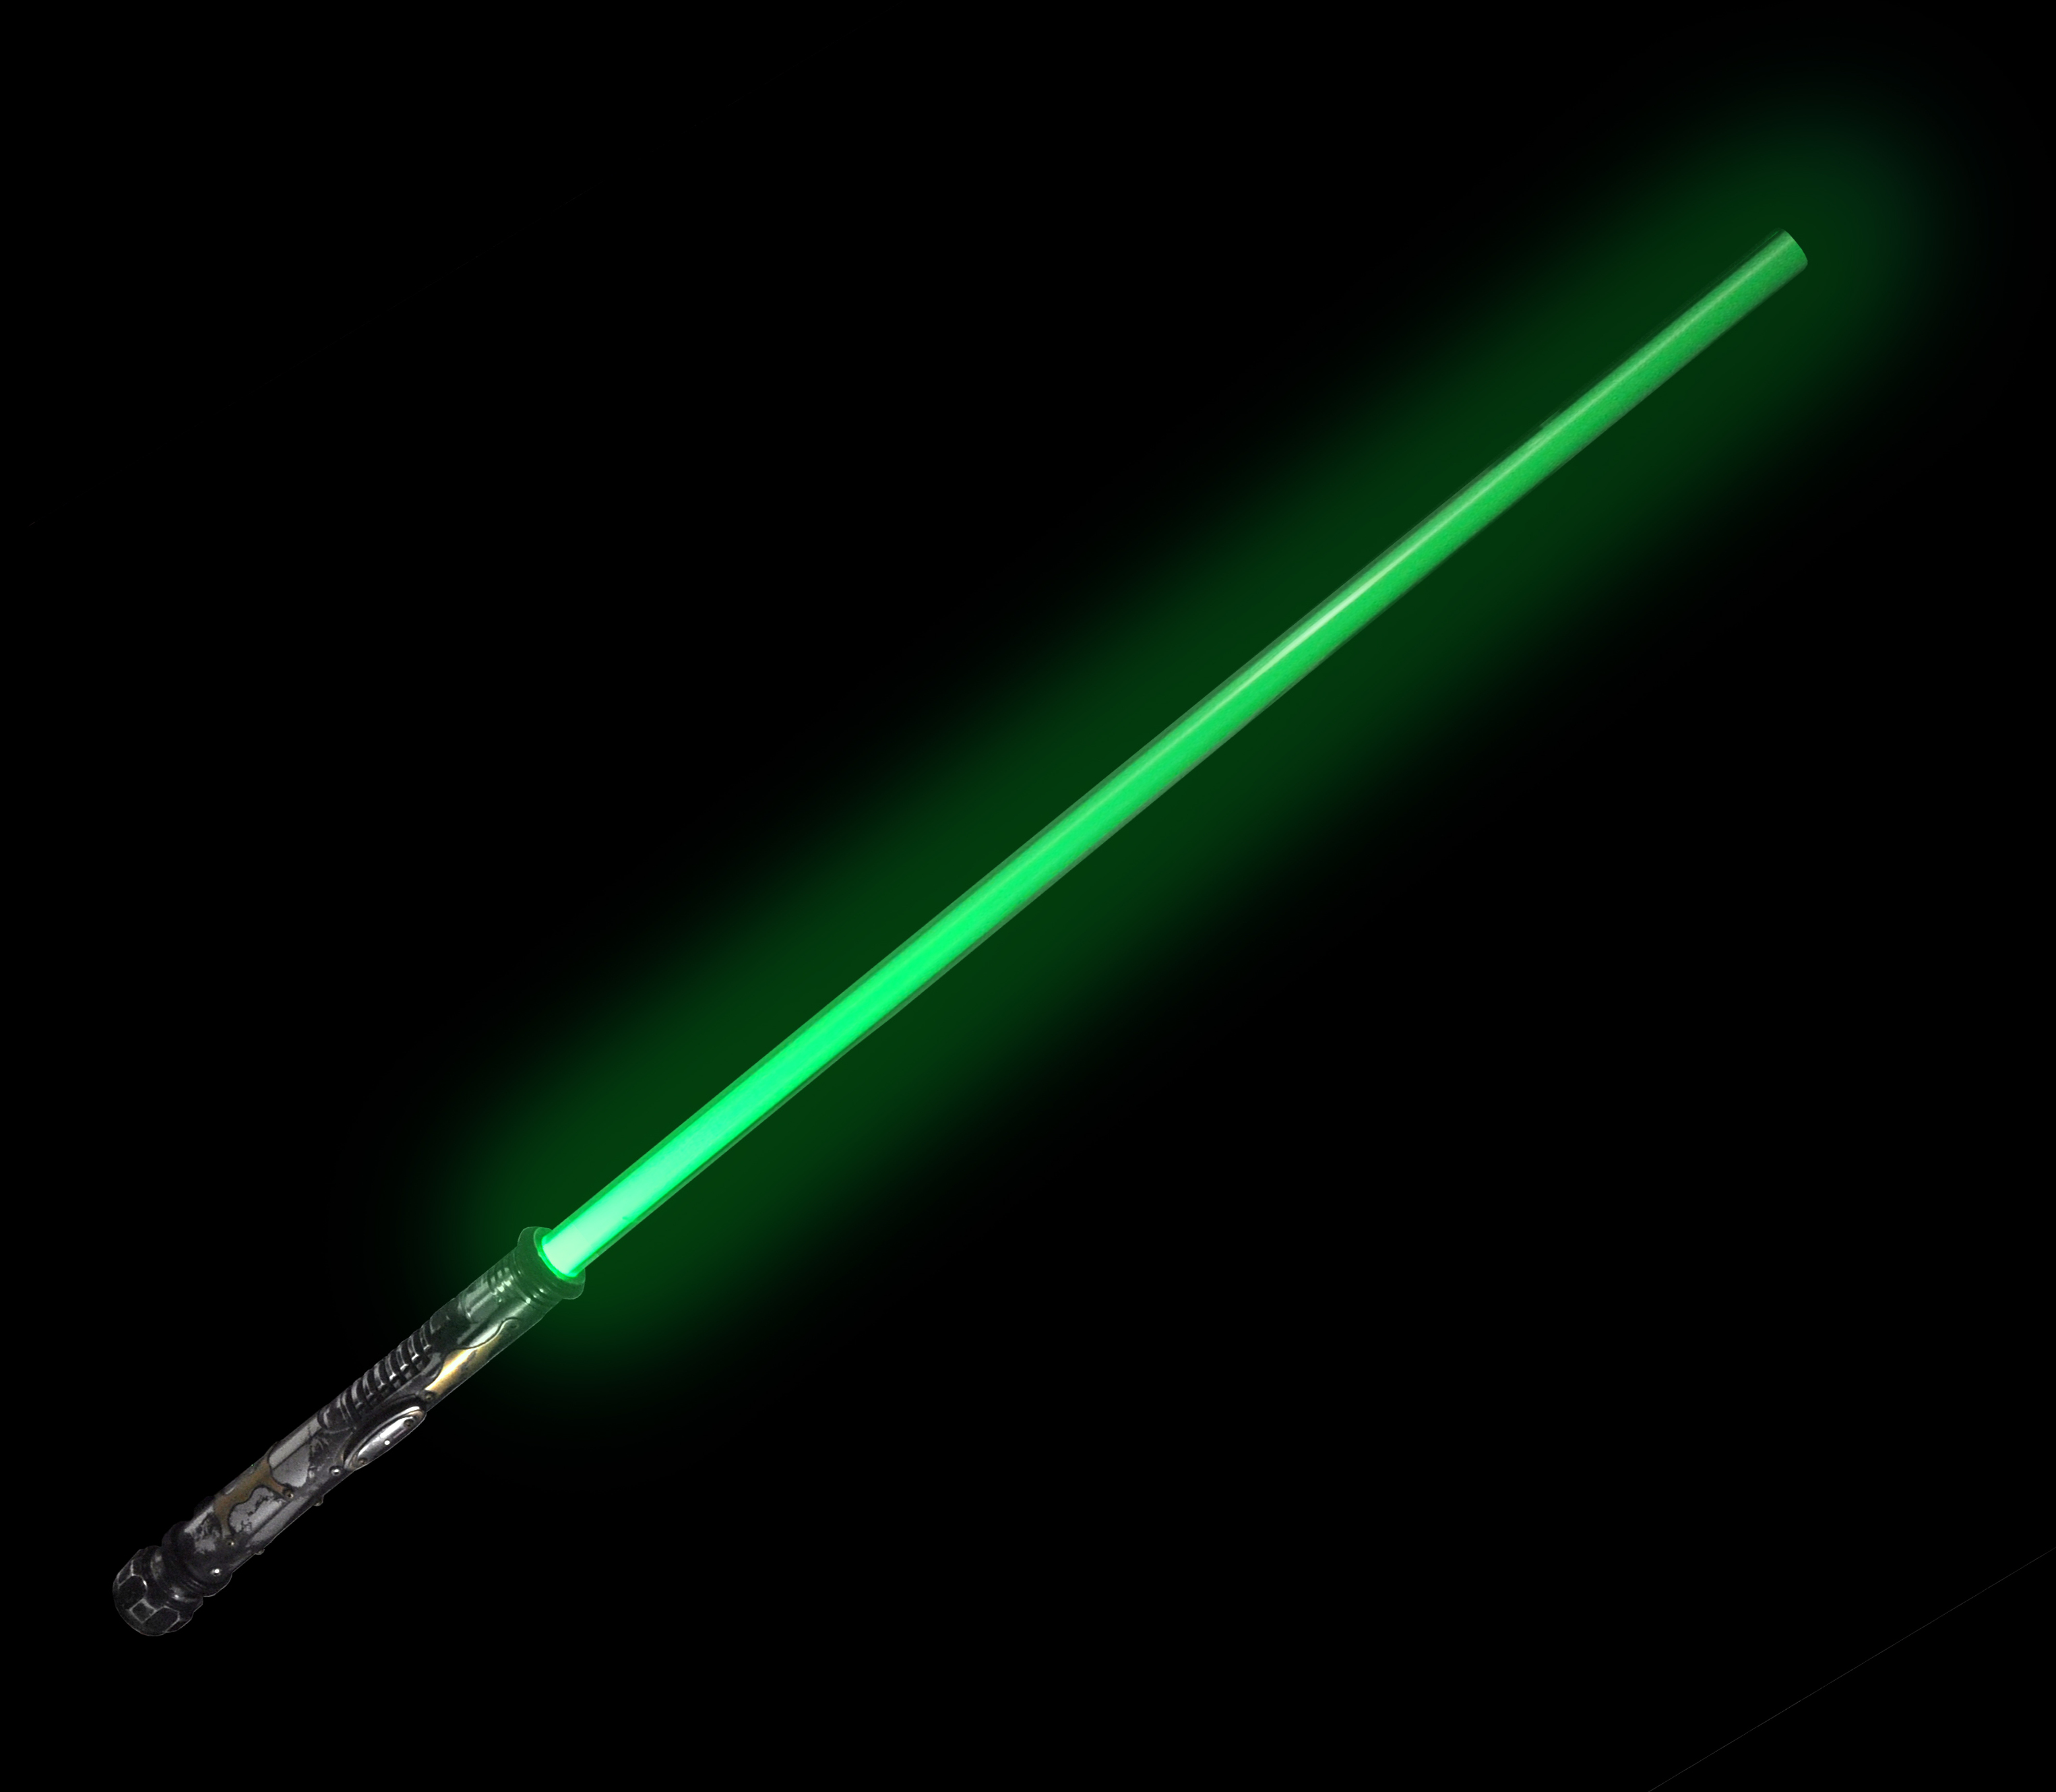 How to Make Your Own Lightsaber - Science Friday